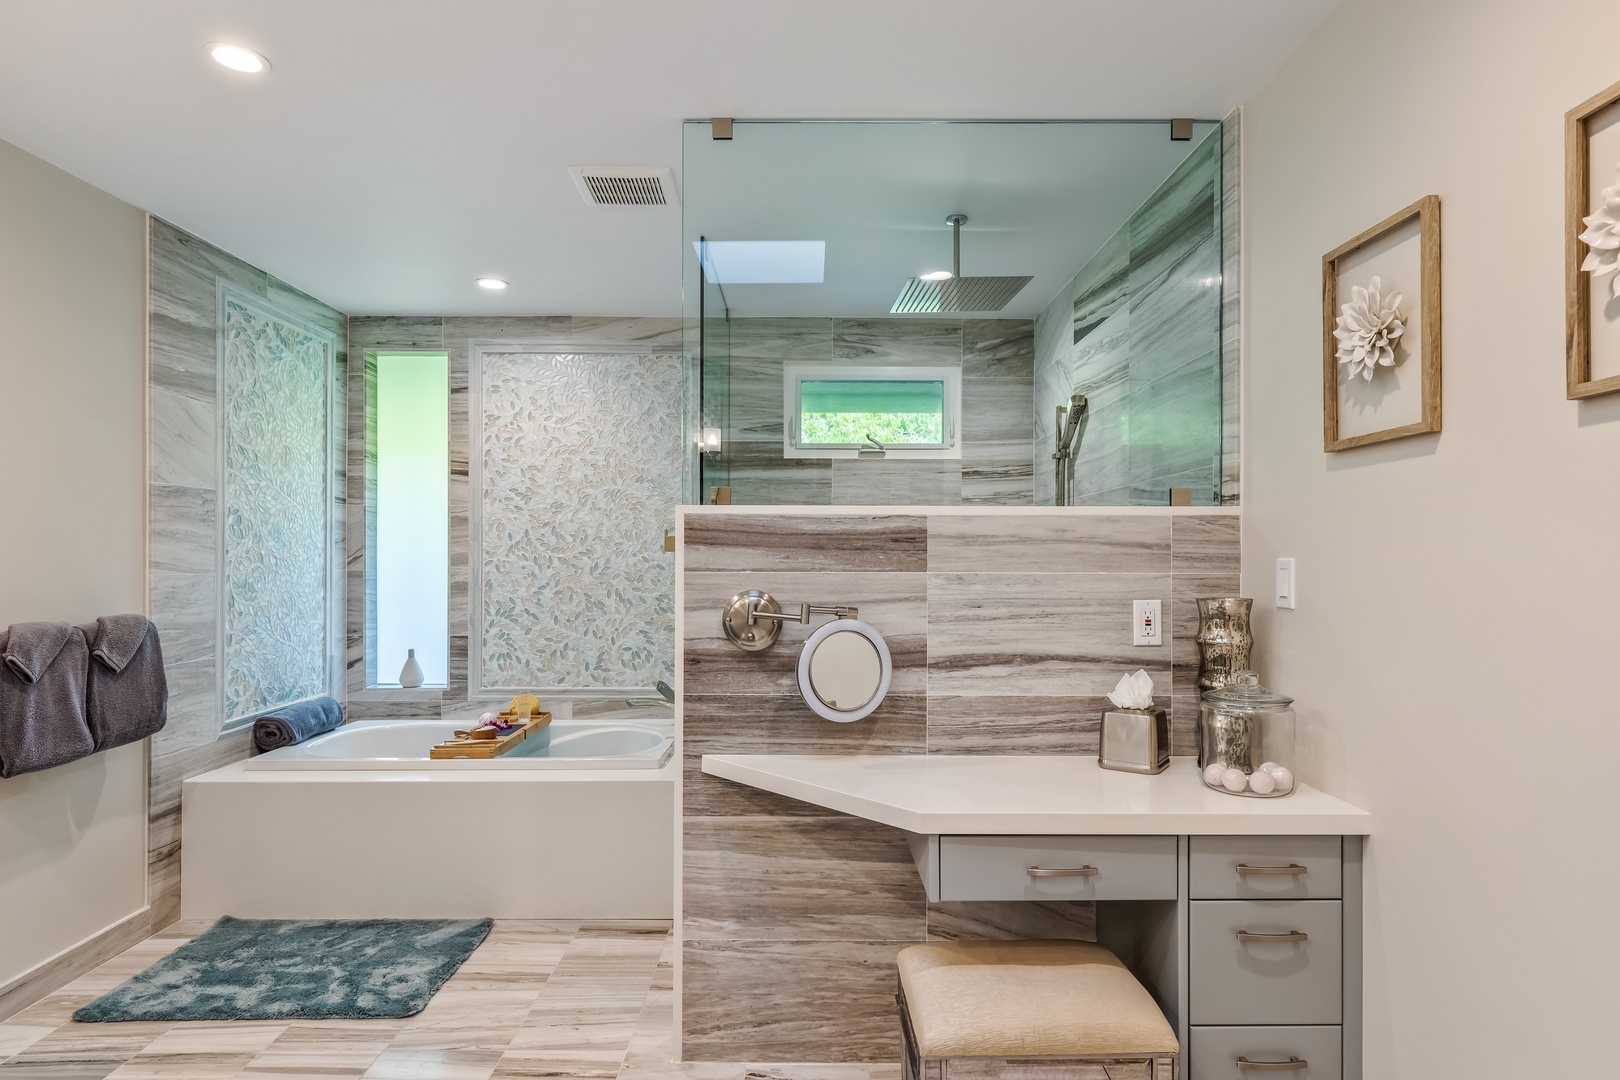 Honolulu Vacation Rentals, Hale Ola - Indulgent private en suite bathroom featuring a soothing jetted tub